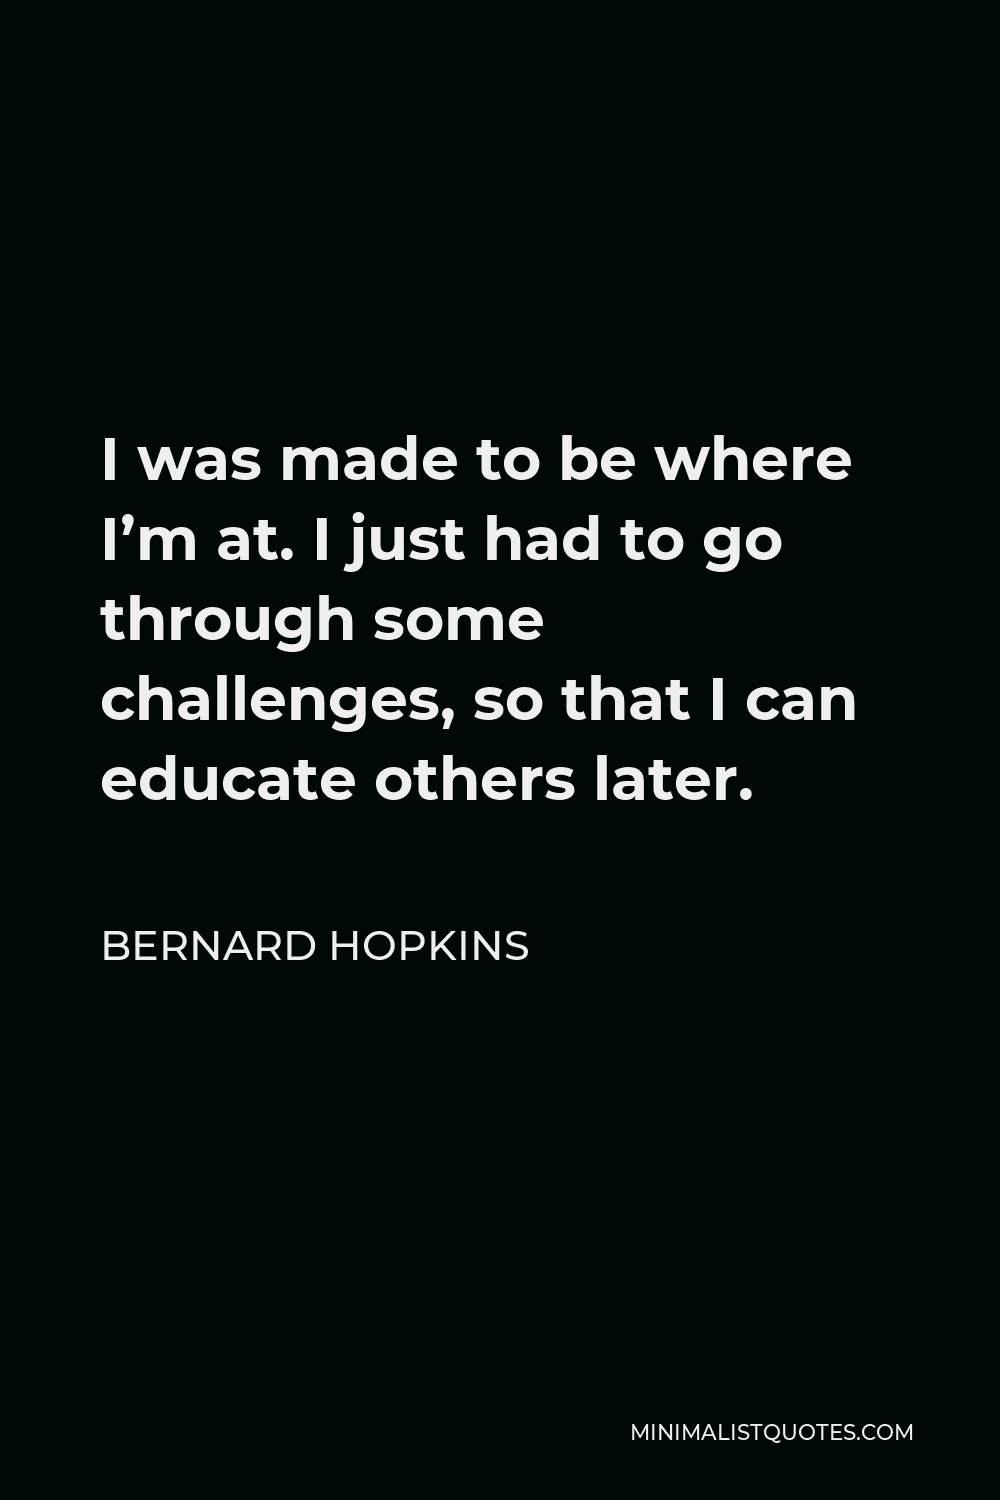 Bernard Hopkins Quote - I was made to be where I’m at. I just had to go through some challenges, so that I can educate others later.